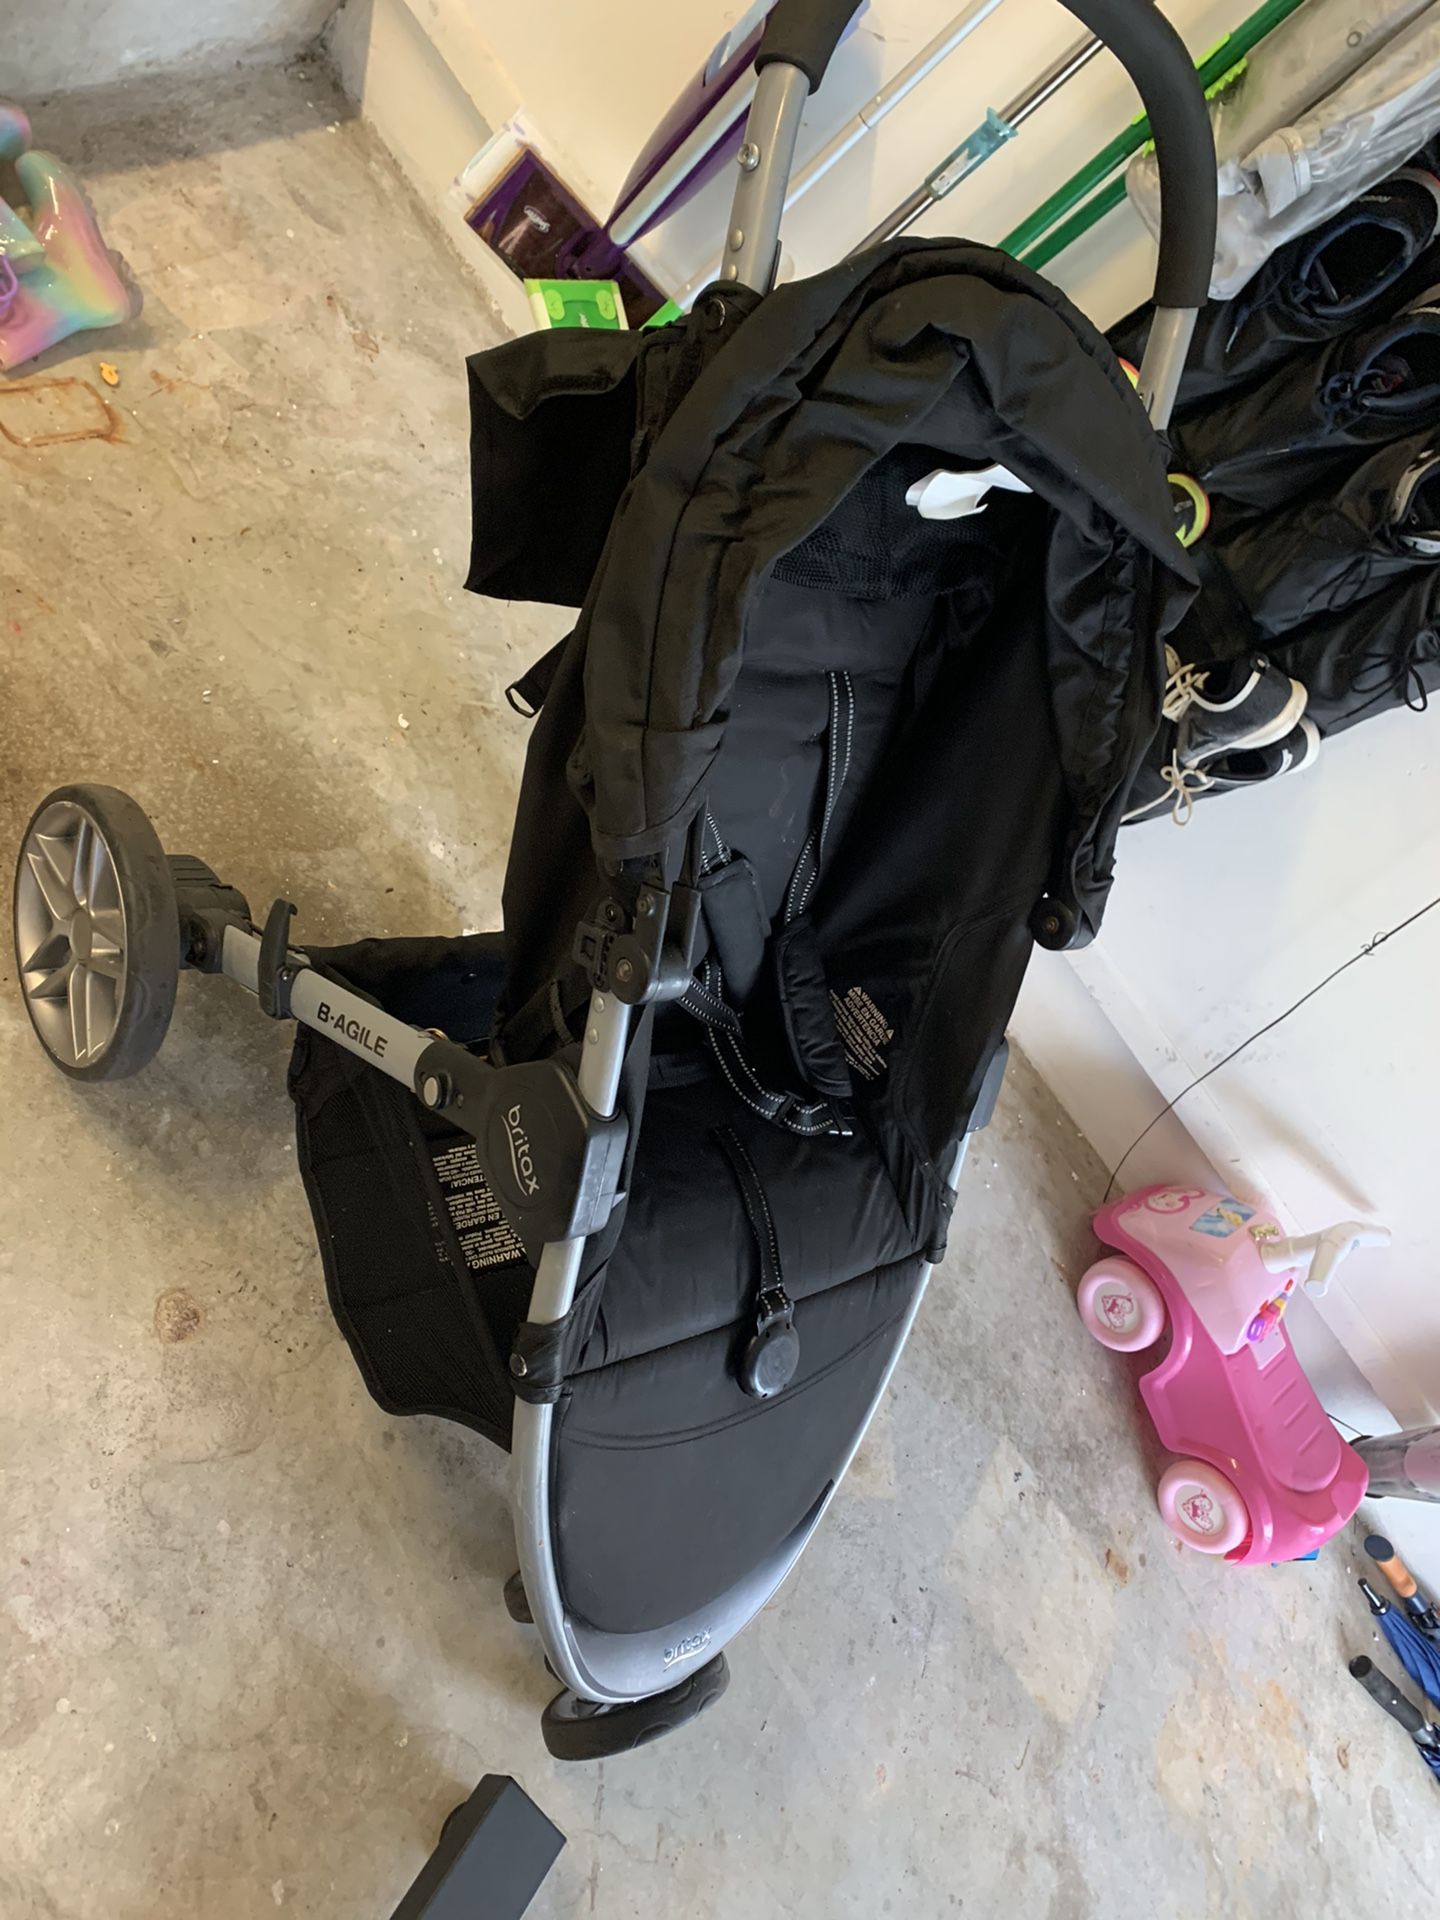 Britax stroller and car seat must go